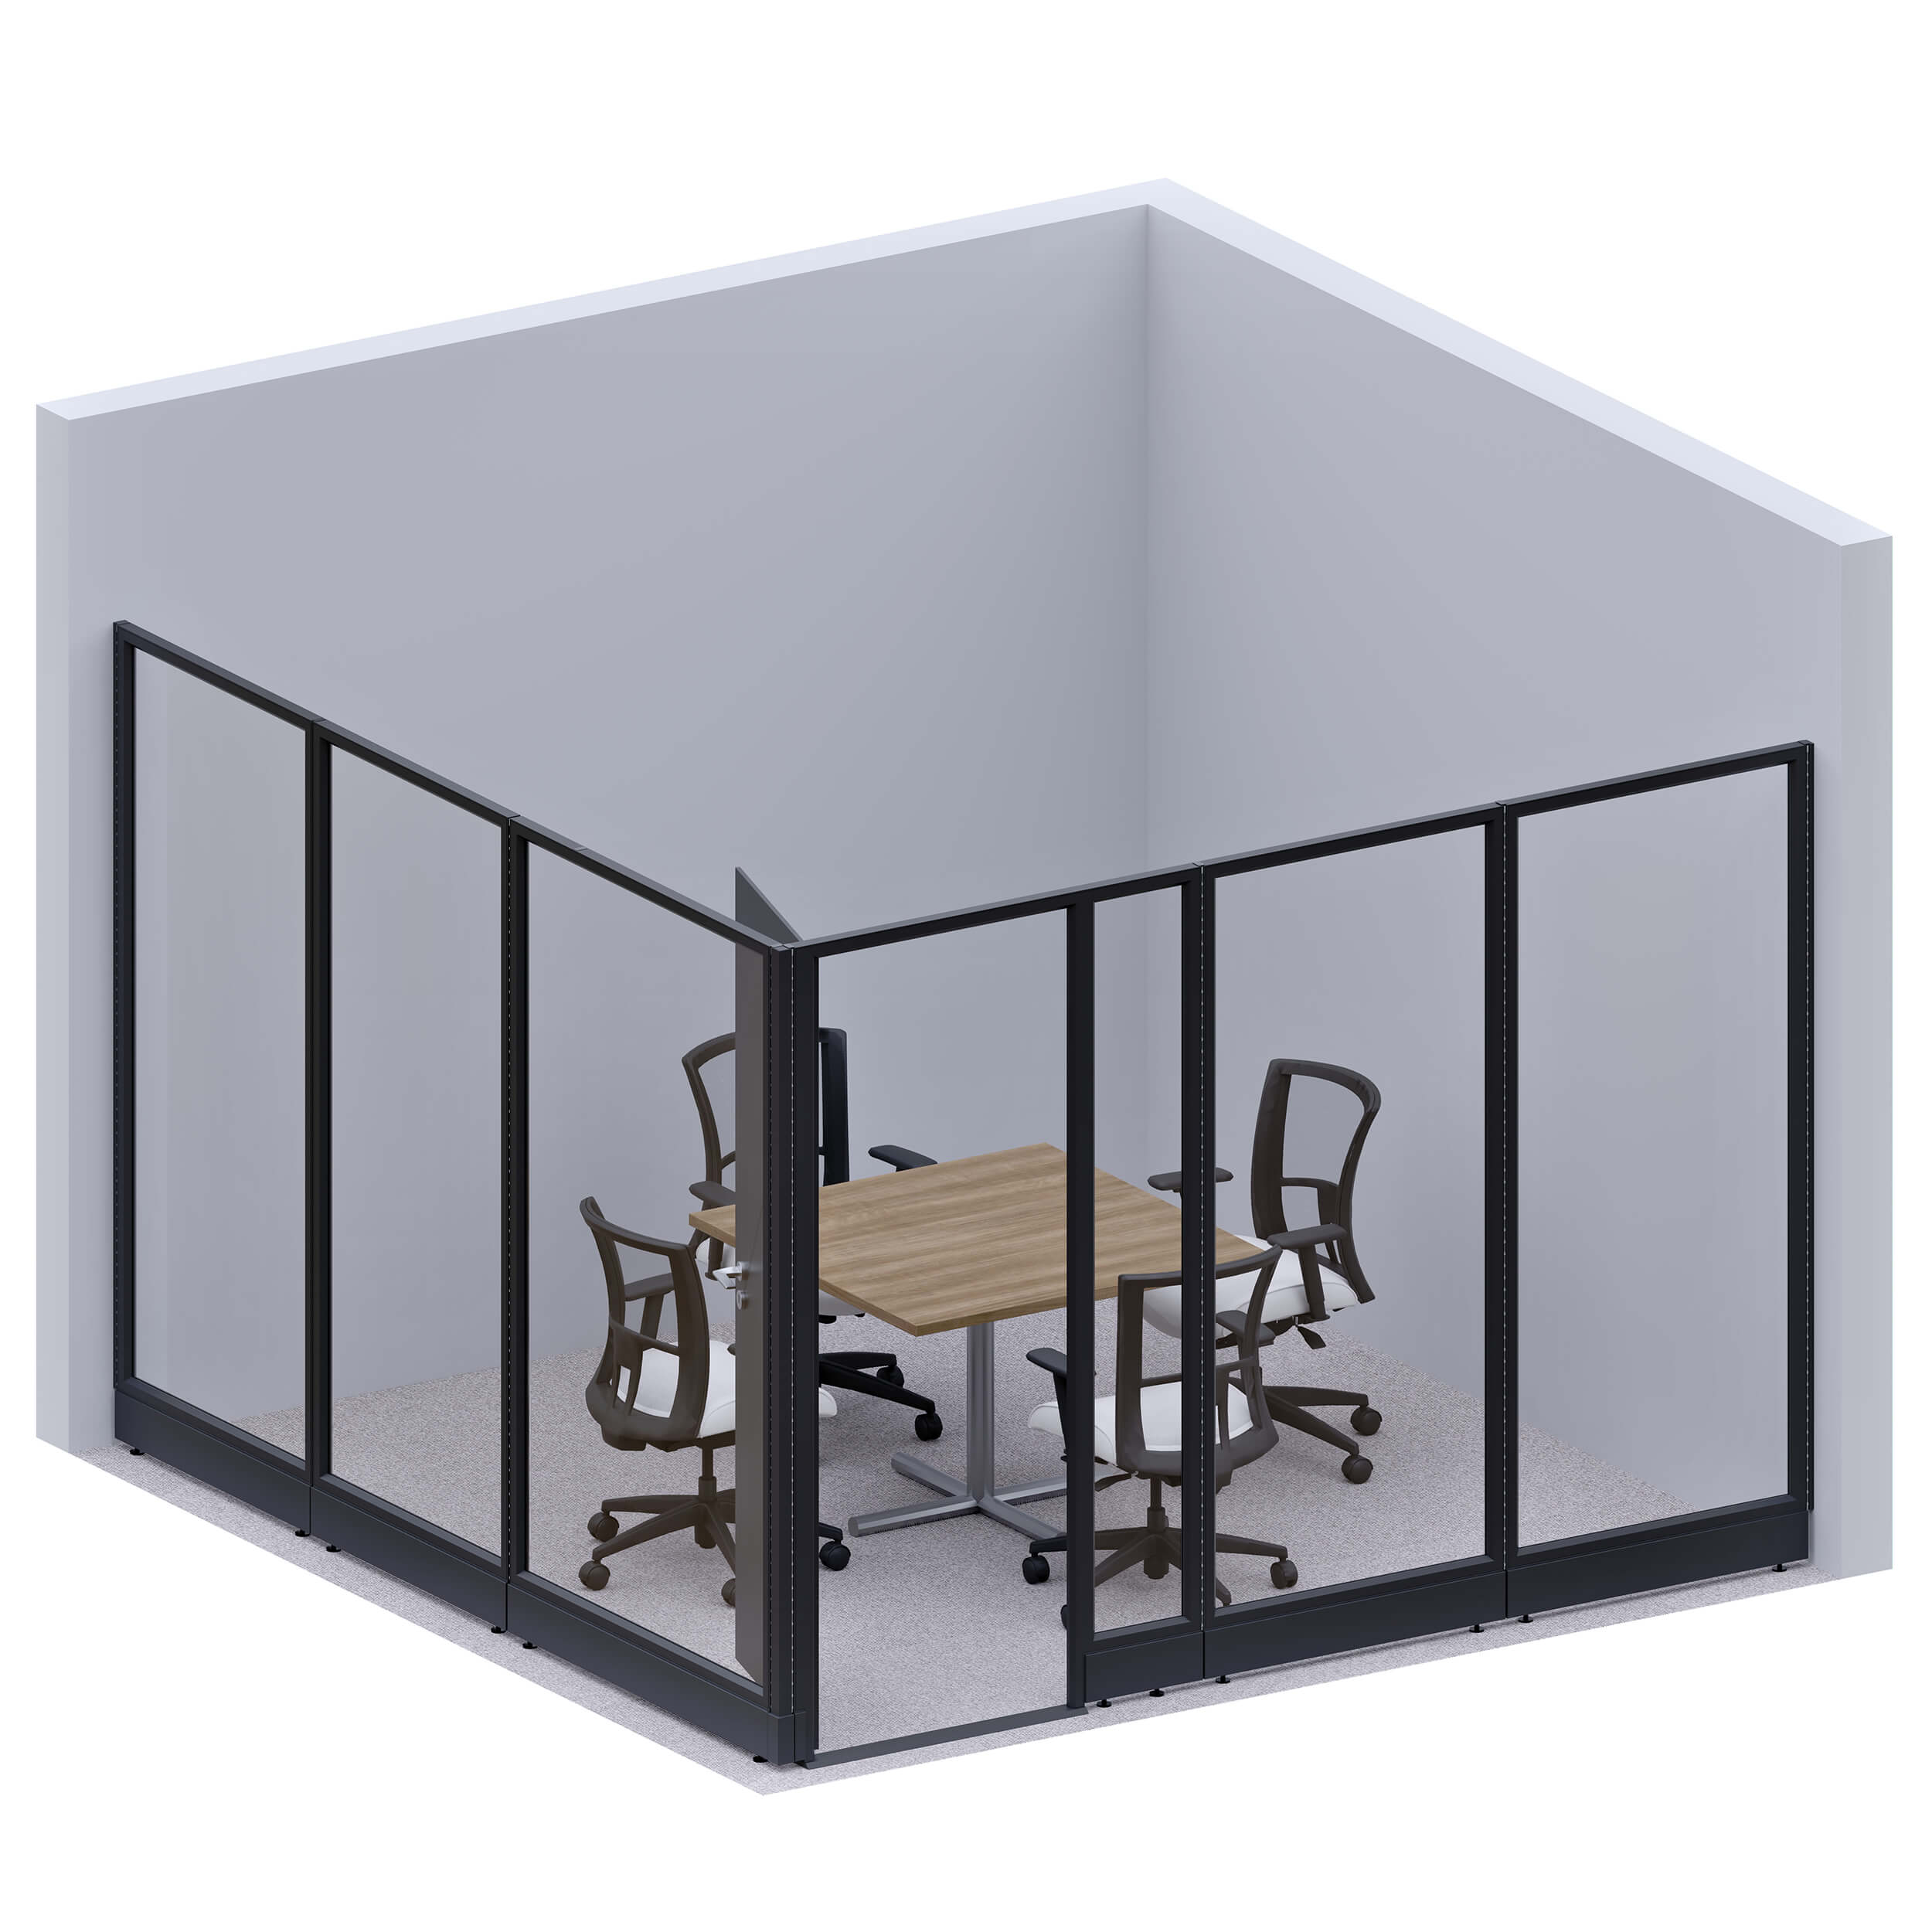 office-walls-glass-wall-conference-room-85h-l-shape.jpg